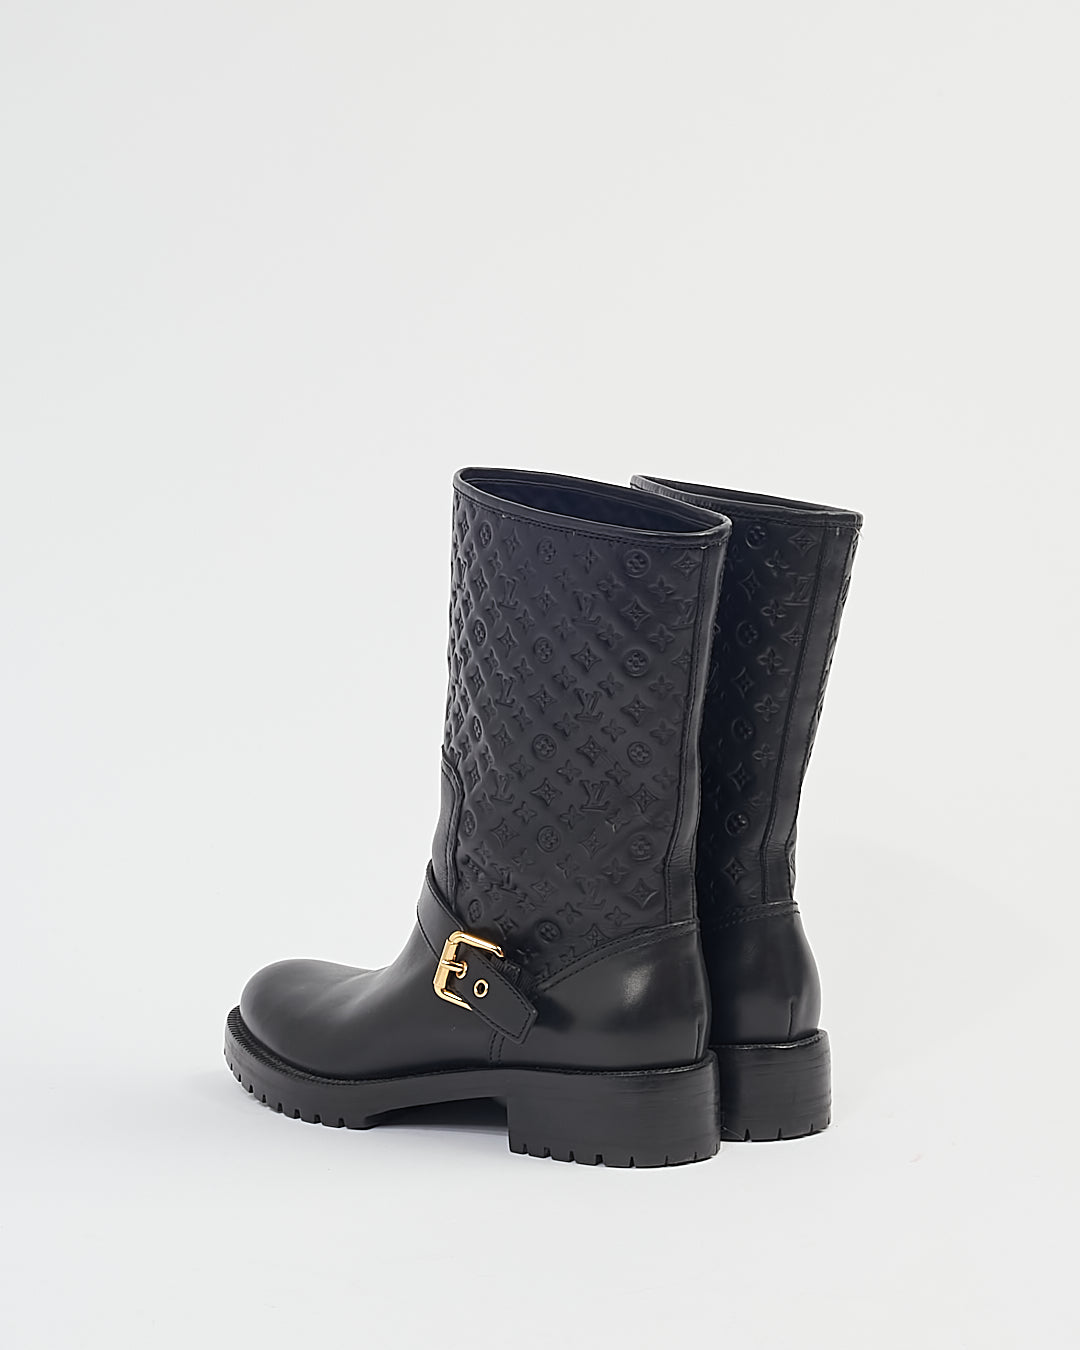 Louis Vuitton Black Smooth Leather Monogram Buckle Boots - 8